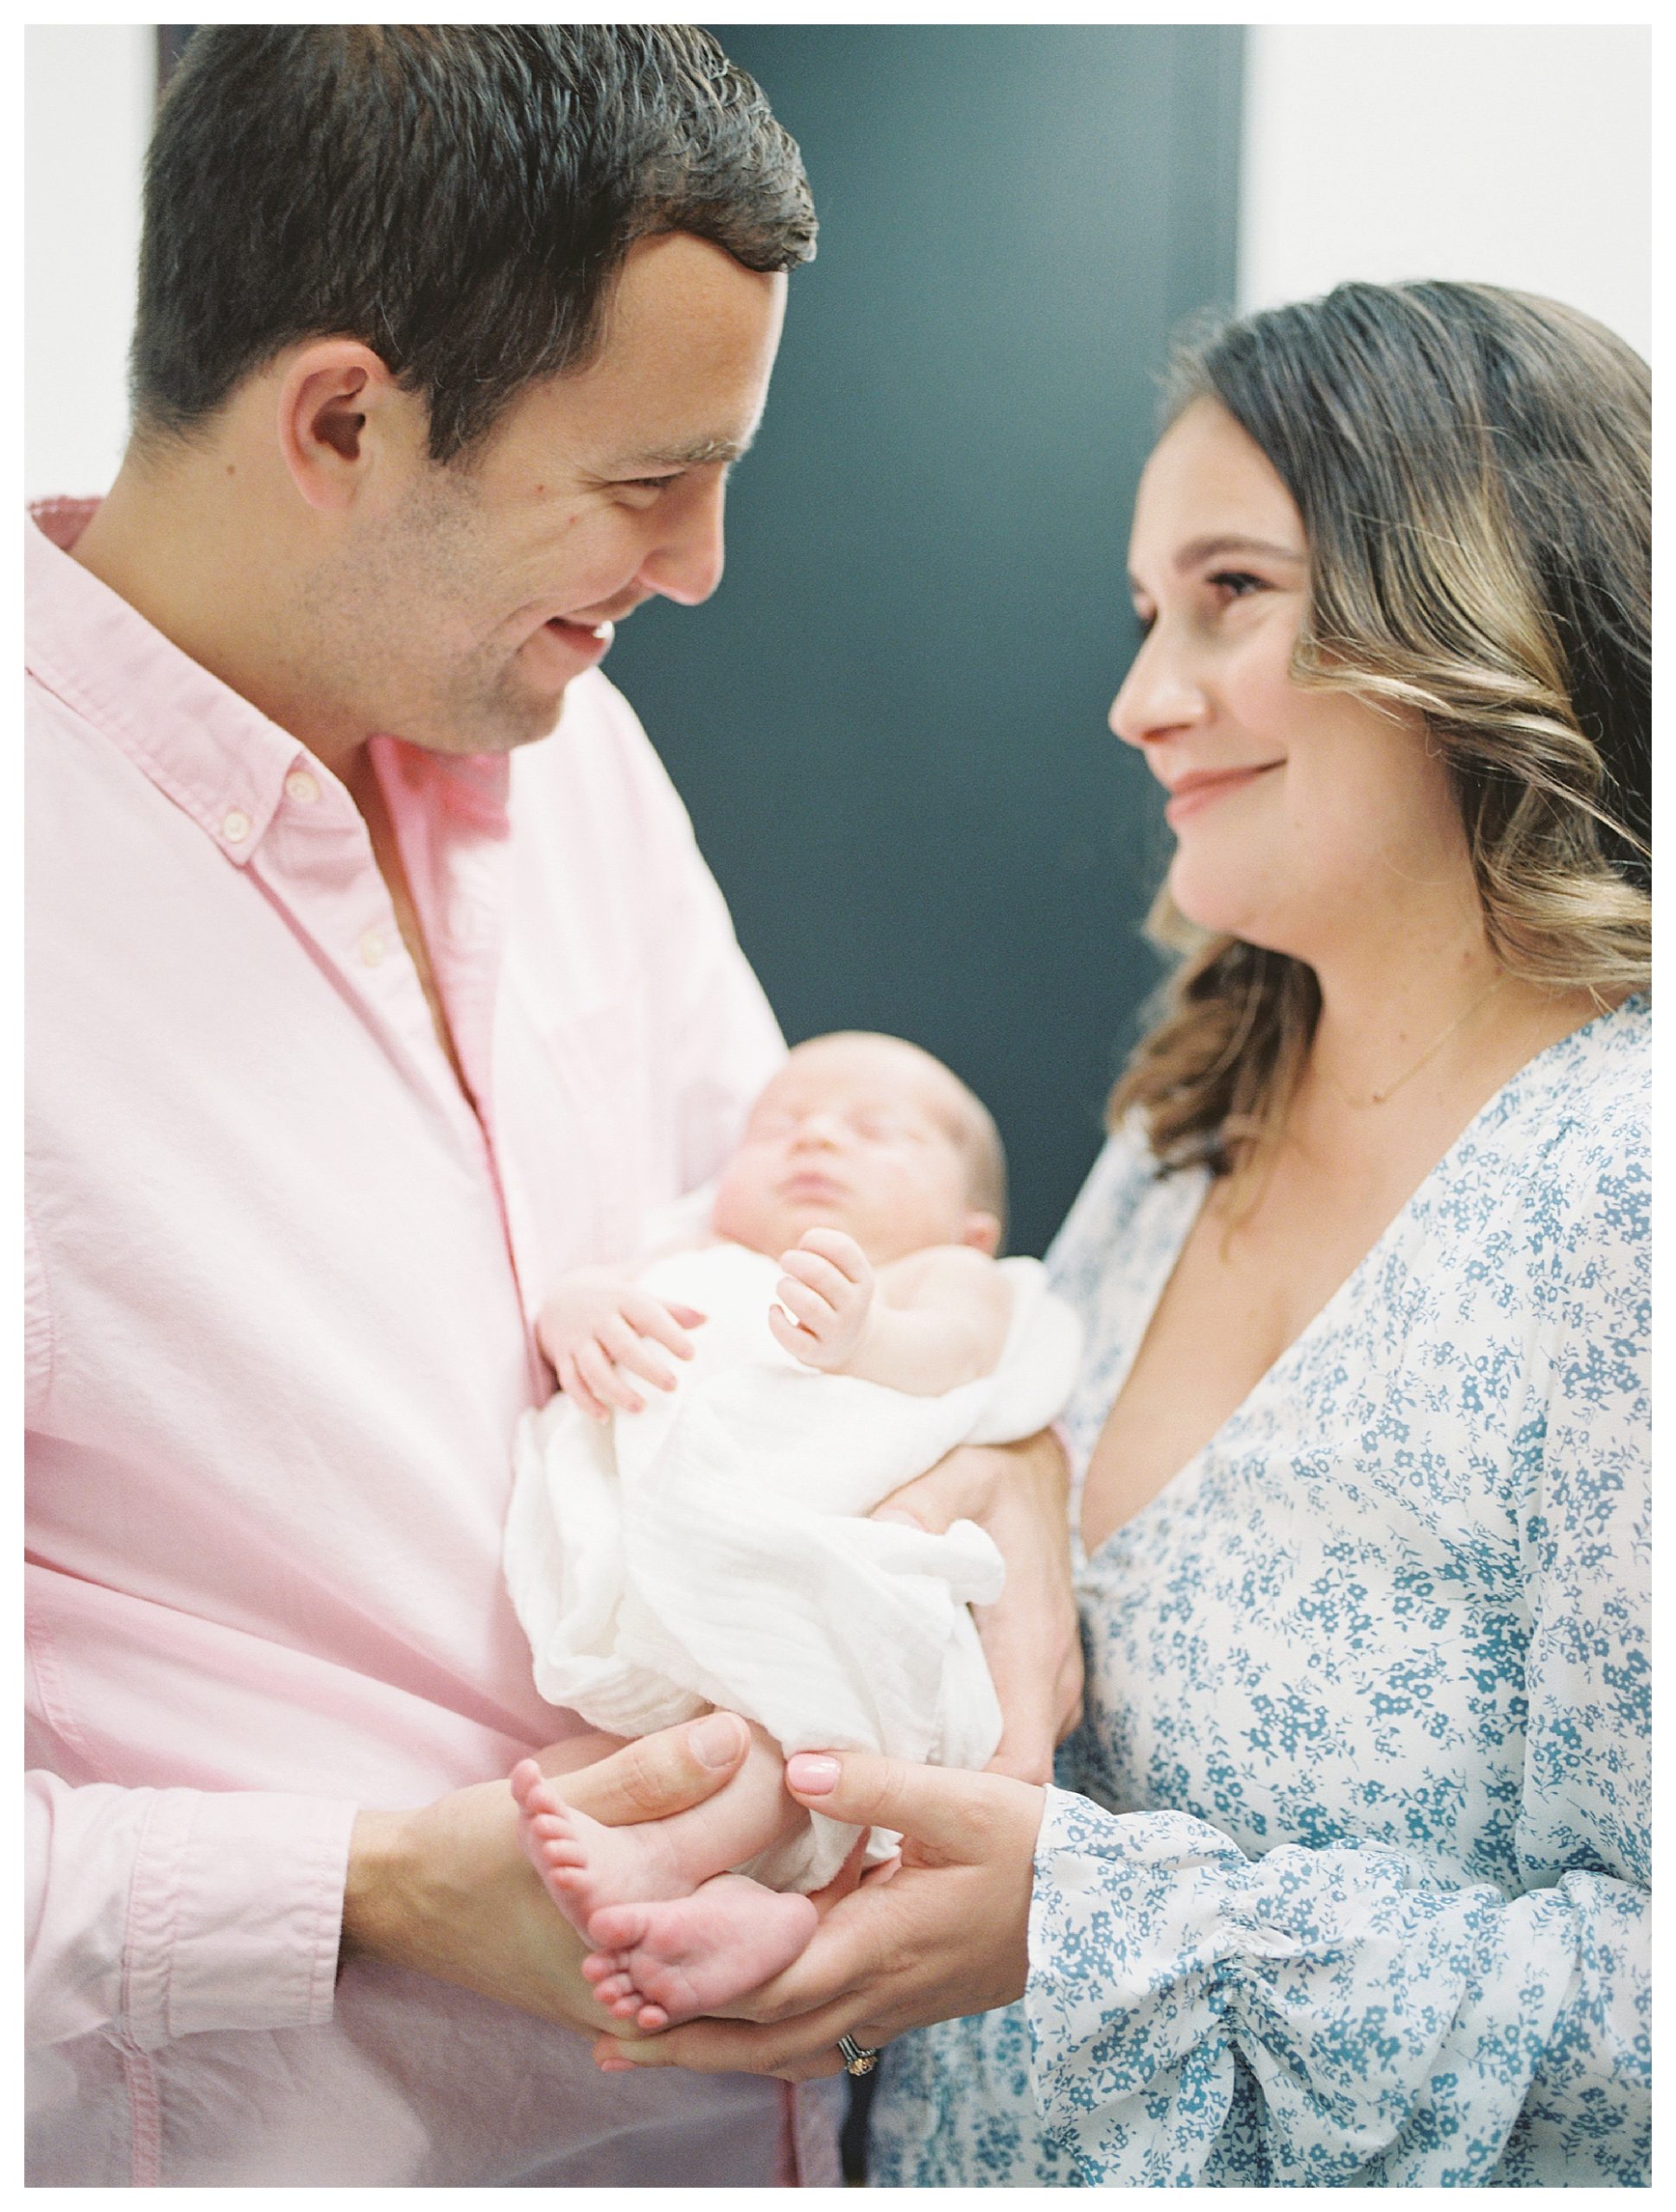 New parents face and smile at one another as they hold their newborn baby girl